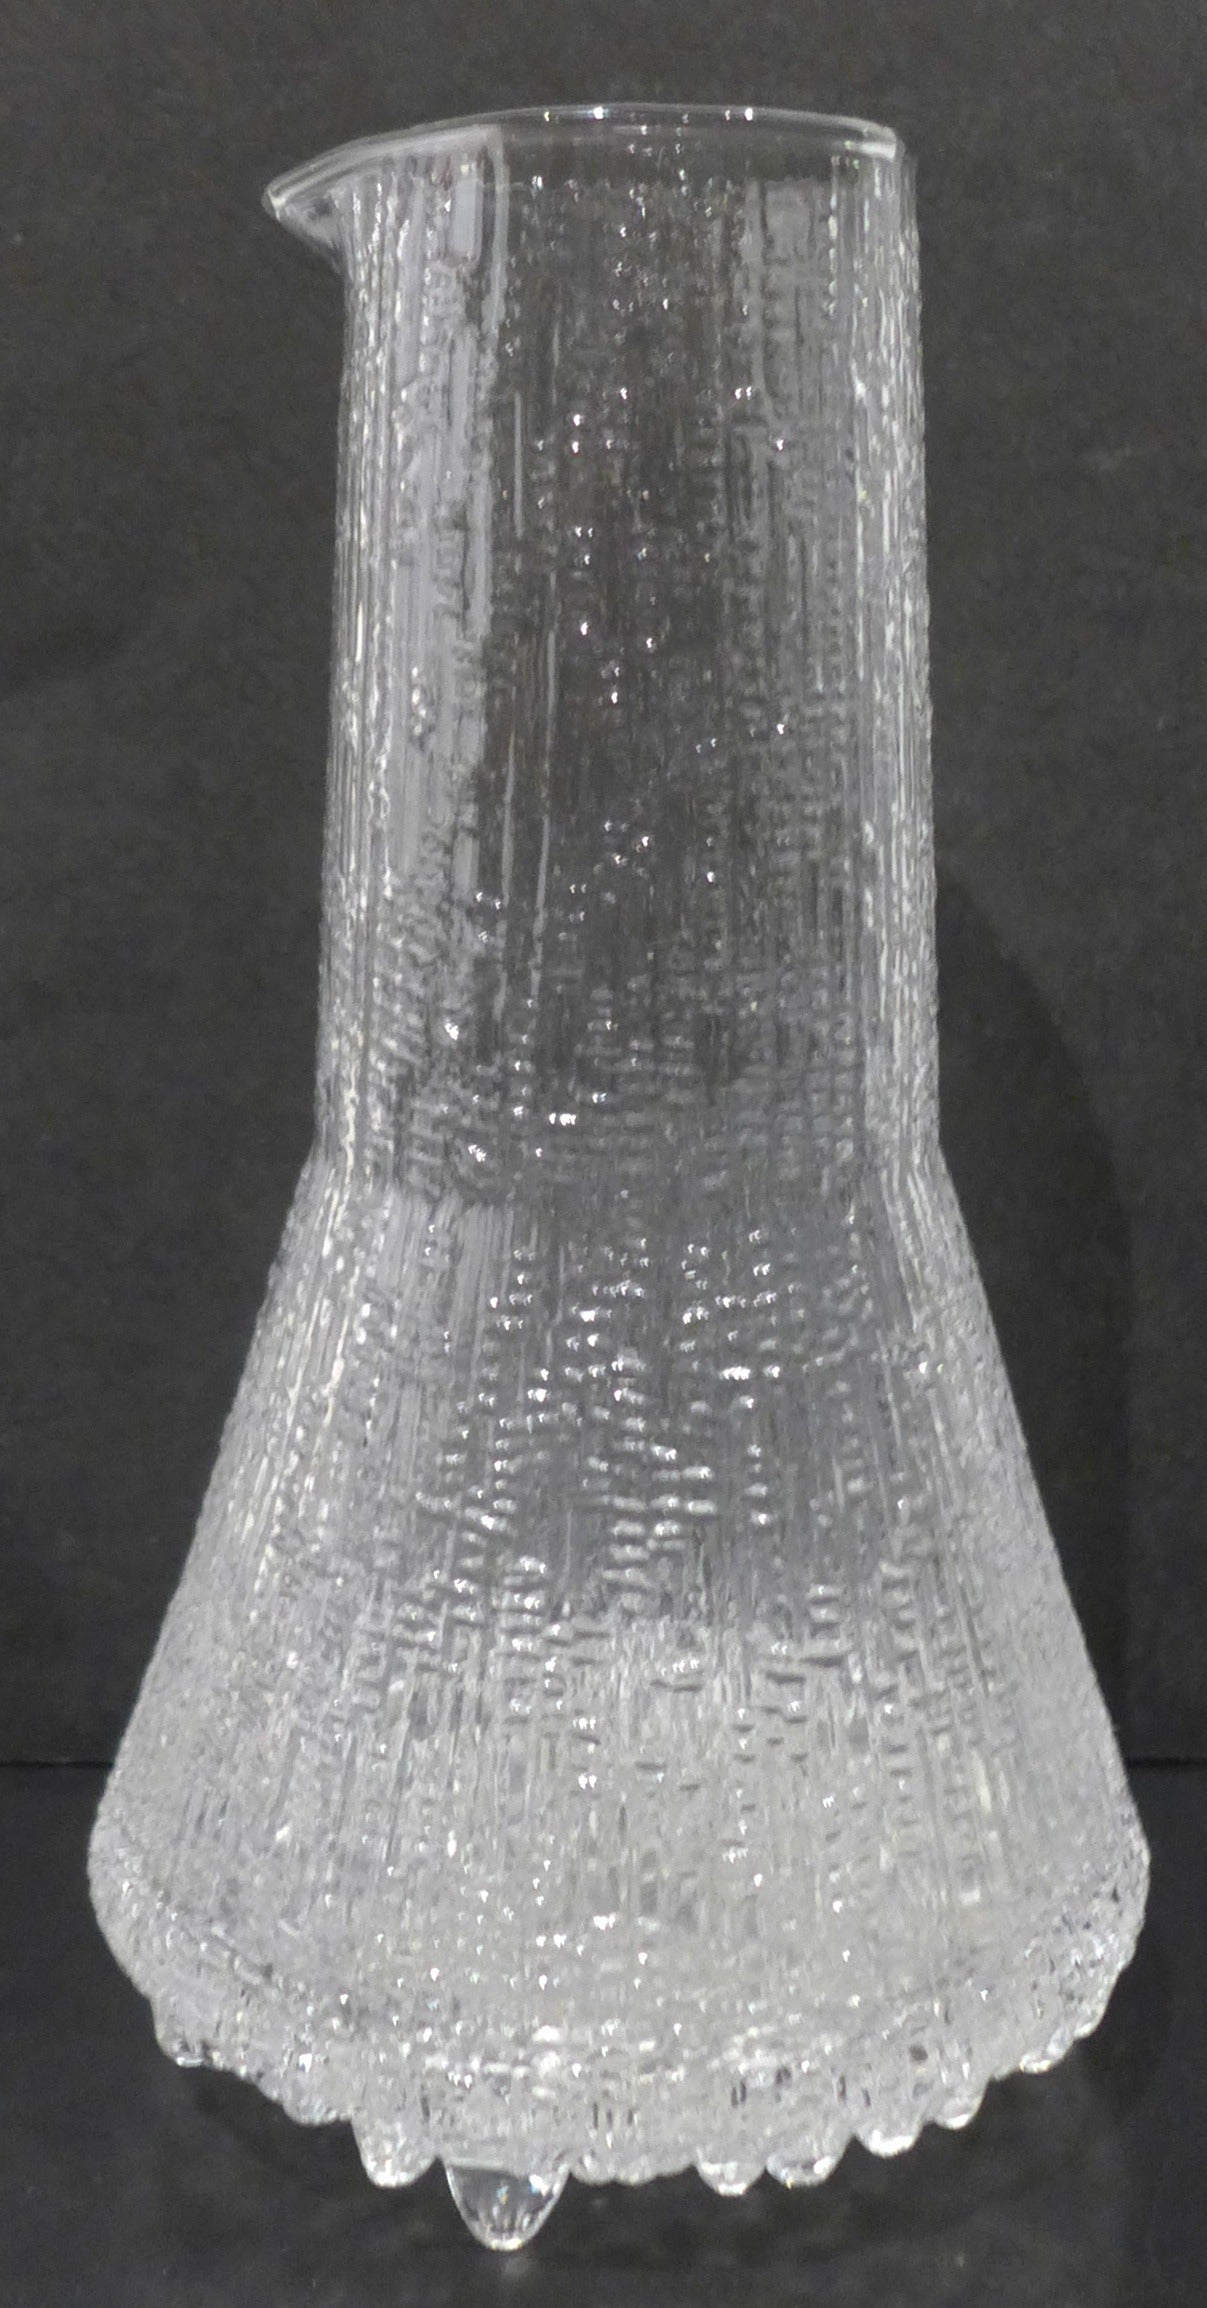 Mold-blown glass carafe designed by Tapio Wirkkala and produced by Iittala, Finland, c. 1970's.  From the Ultima Thule line, inspired by the structure of ice.
In excellent original condition.